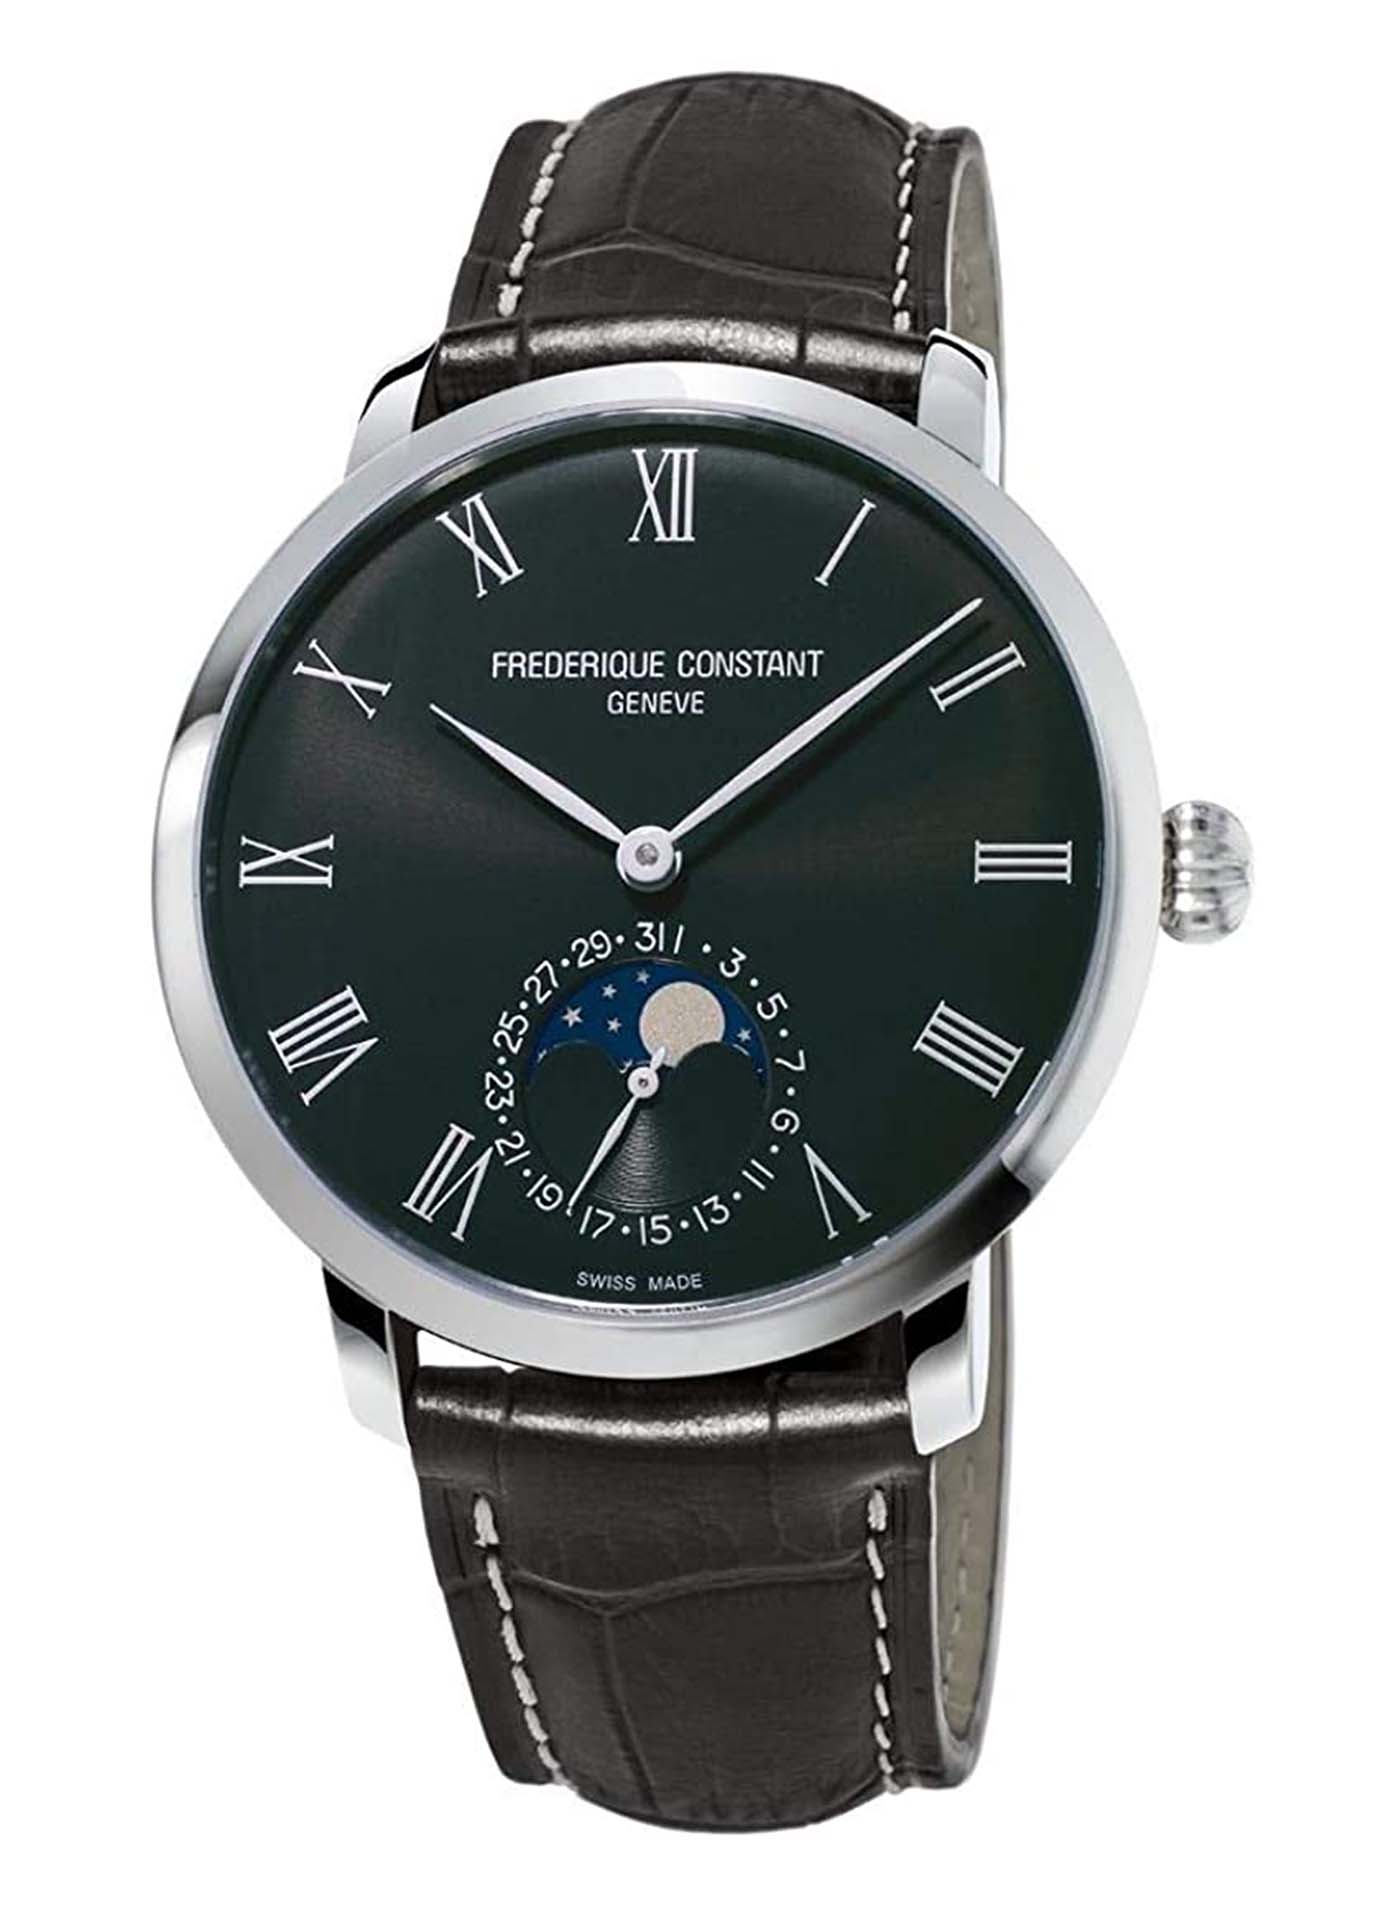 Moonphase Automatic Black Dial Watch FC-705GR4S6 Image